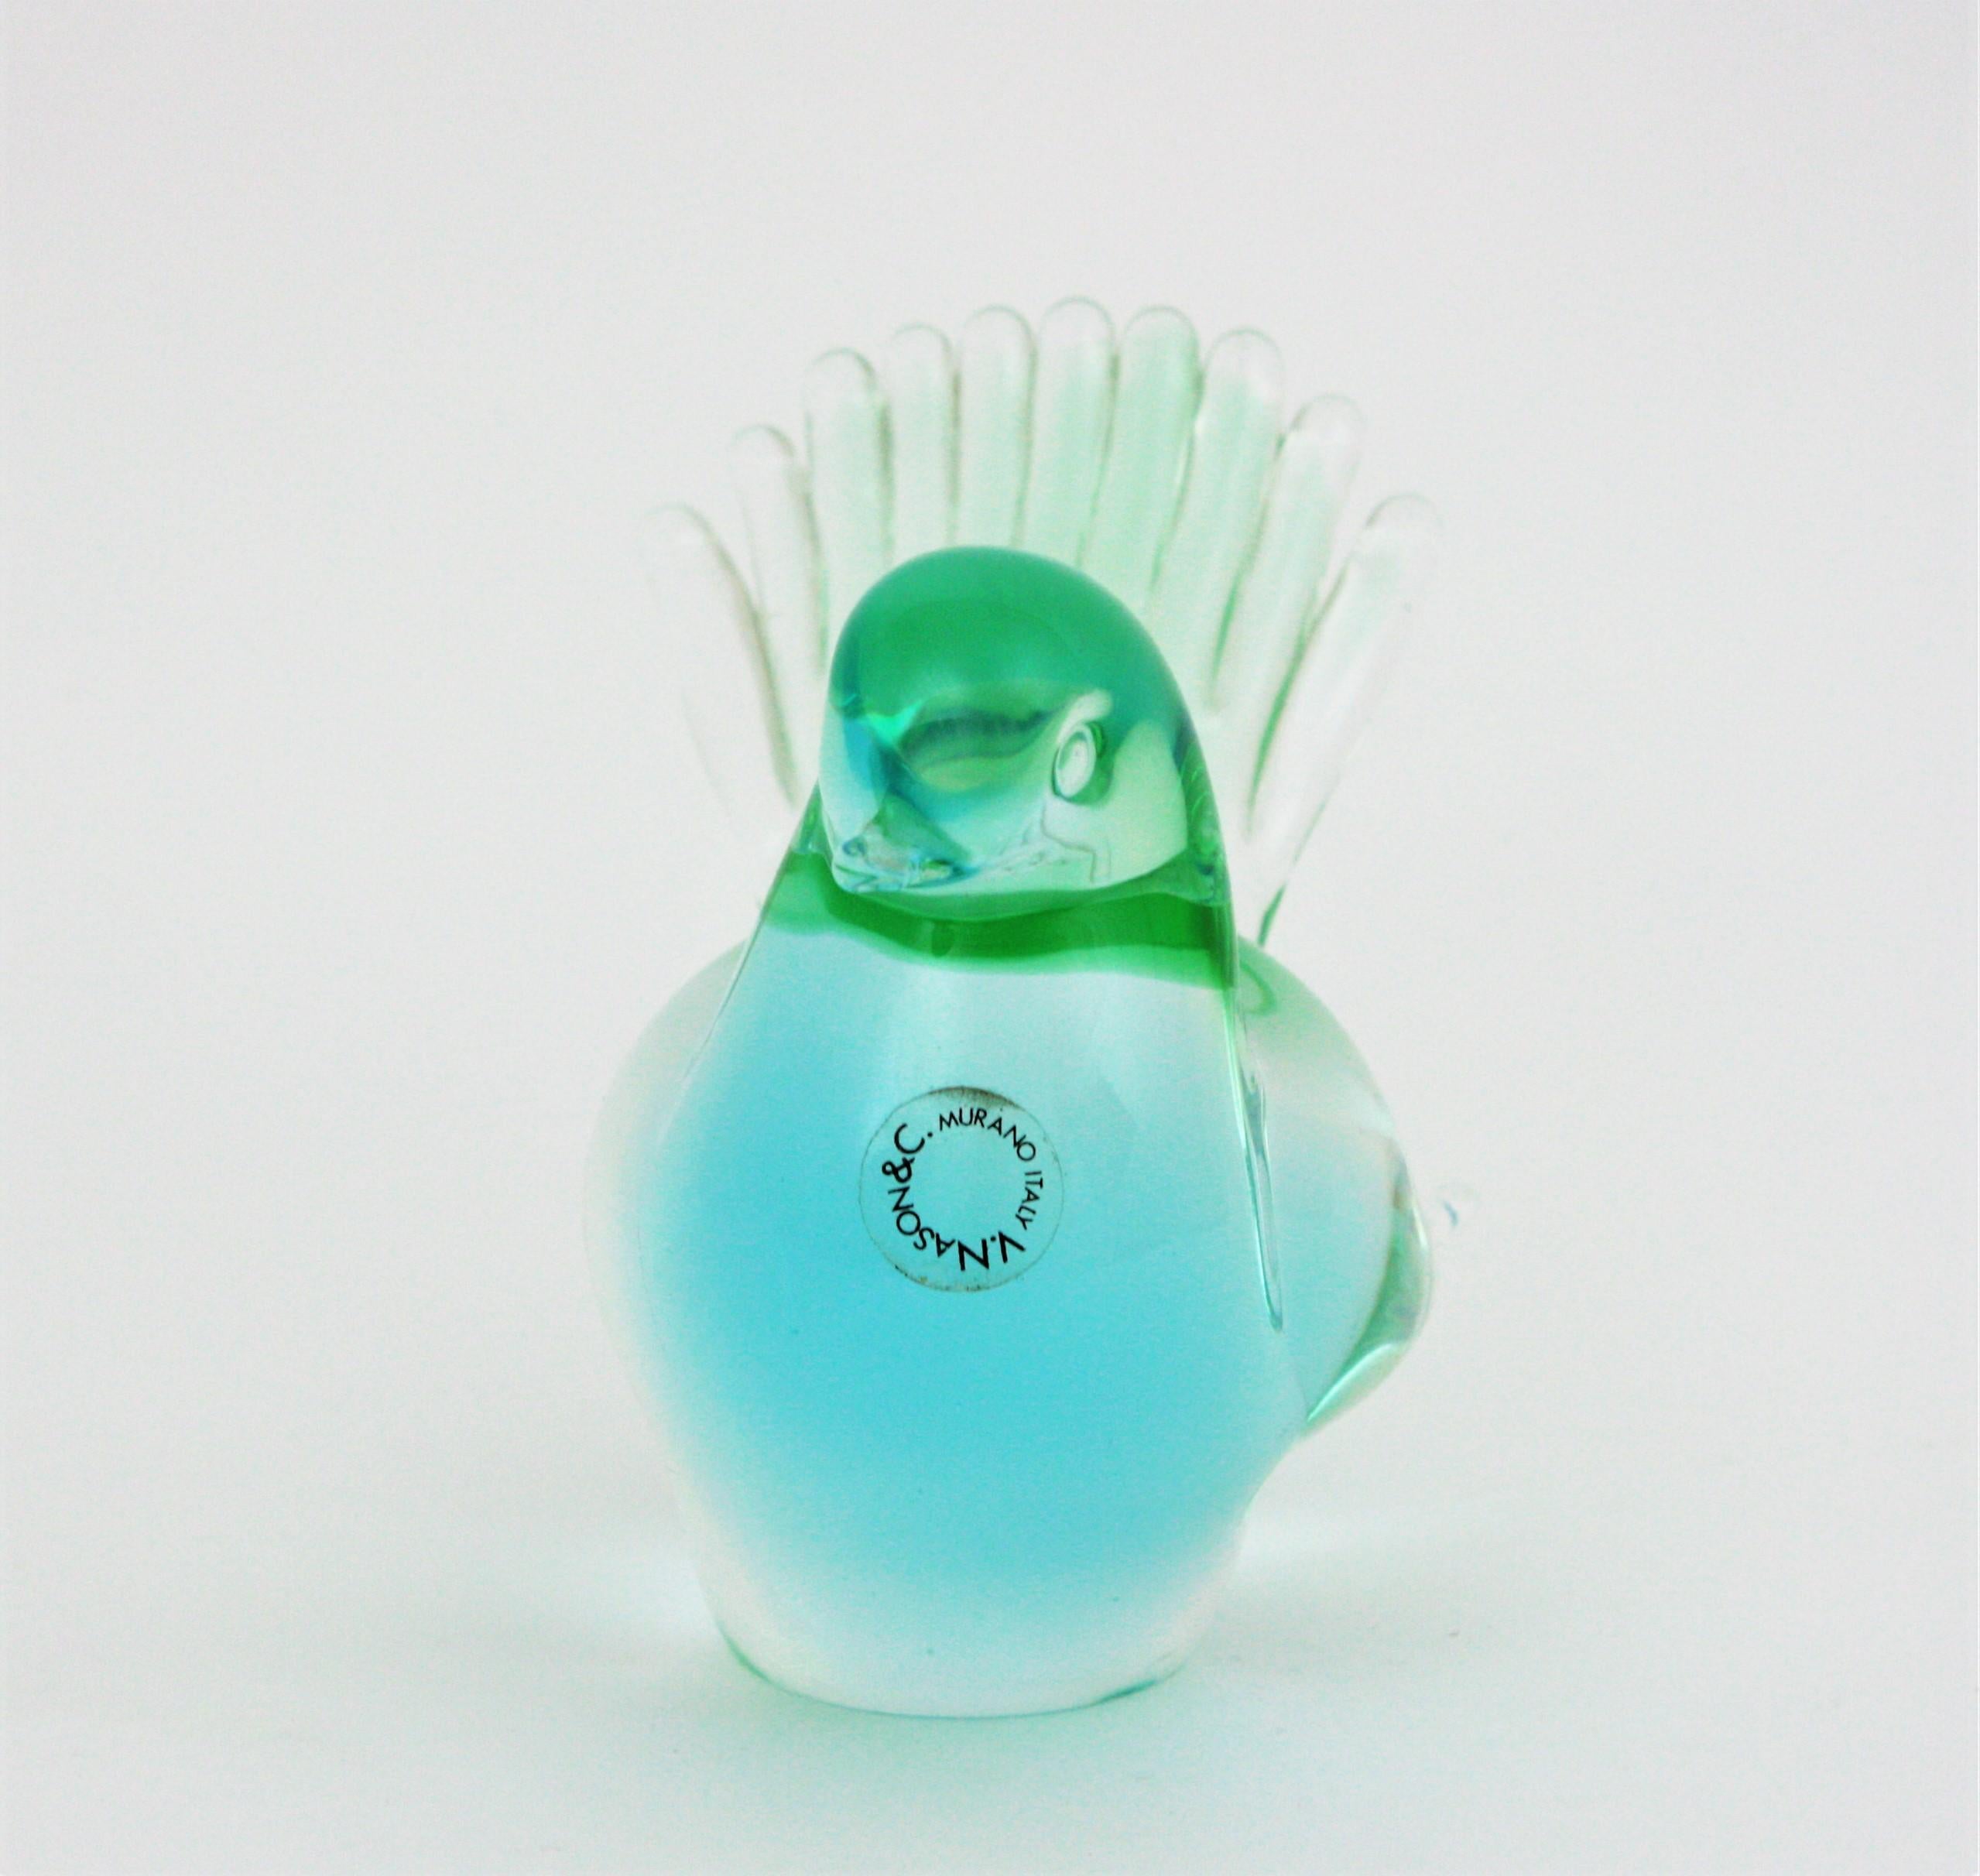 Vincenzo Nason Murano Art Glass Green Blue Bird Paperweight Figurine In Excellent Condition For Sale In Barcelona, ES